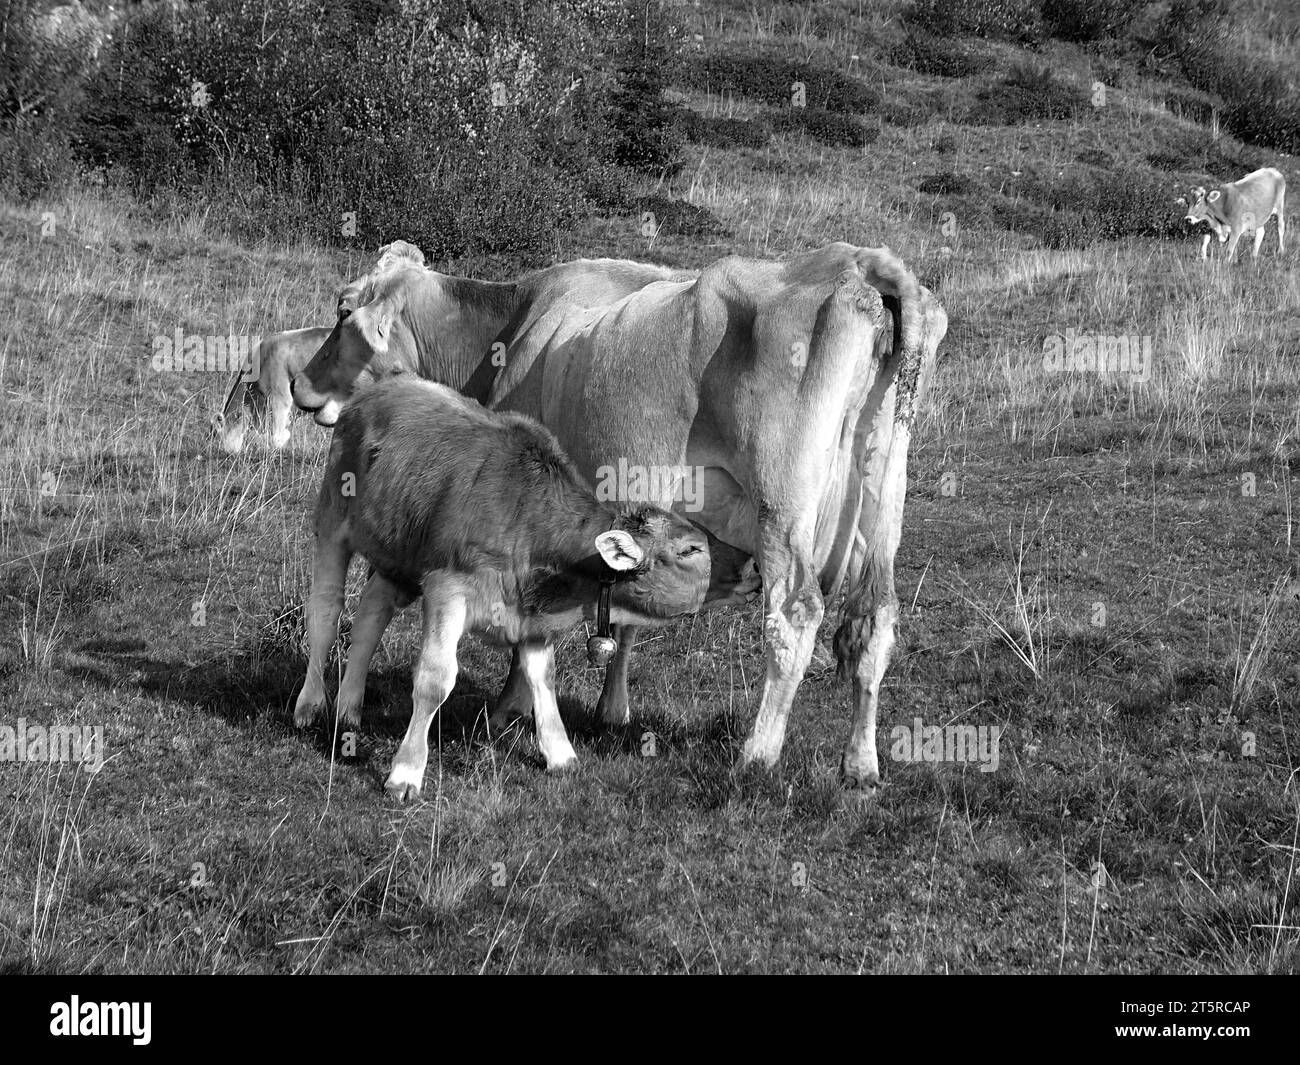 Cow and brown red spotted calf together in the meadow while the calf drinks milk from her mother. Photo taken in black and white. Stock Photo